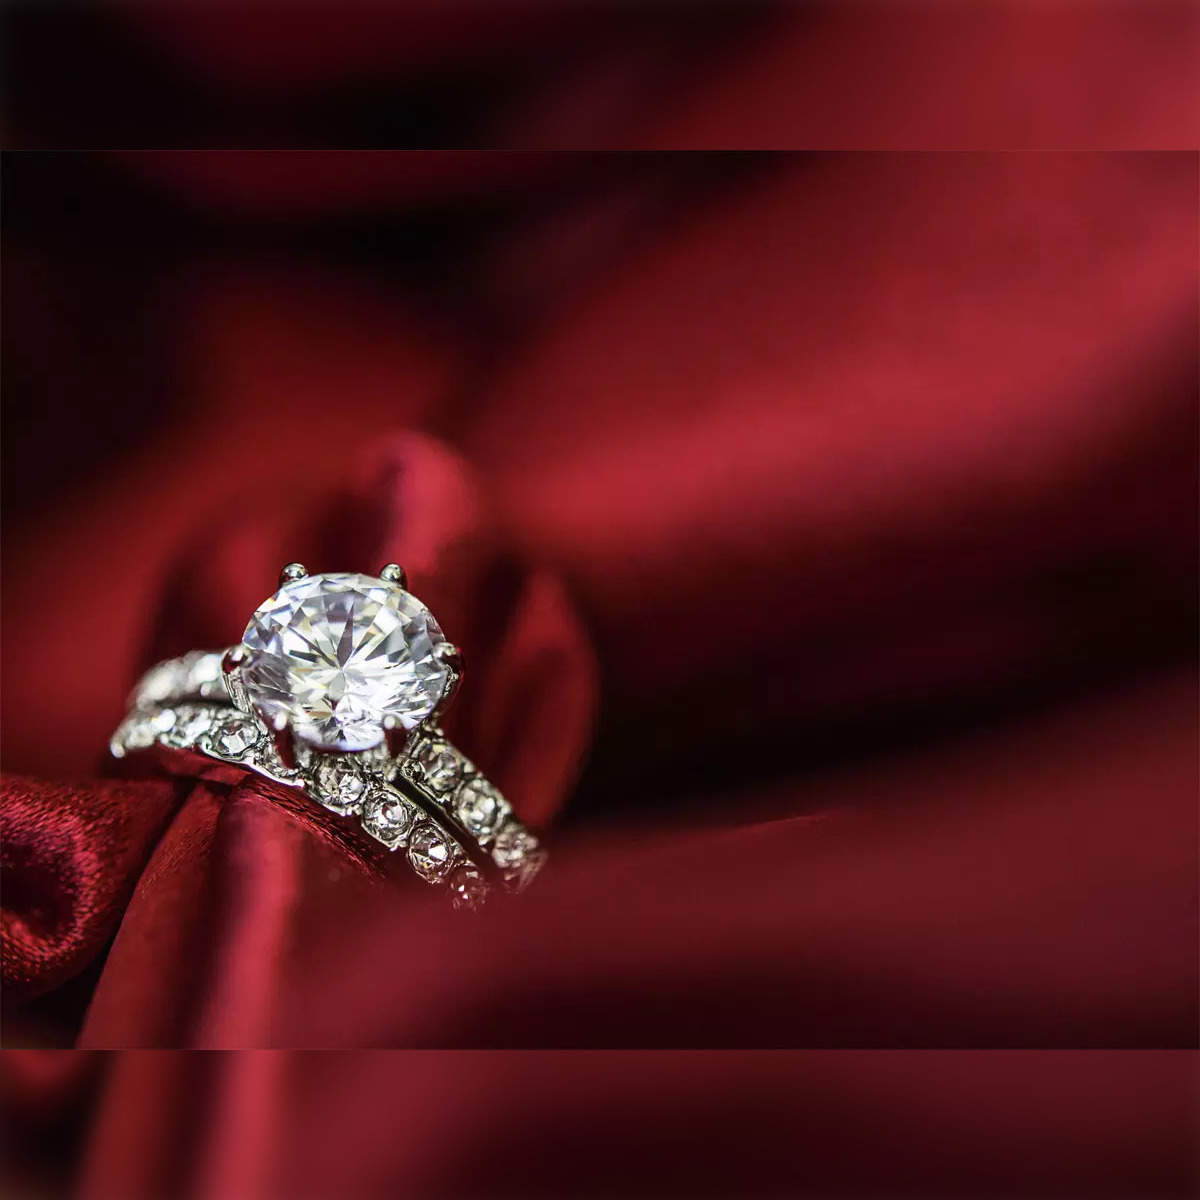 Diamond Jewellery buying guide: Buying Diamond Jewellery? Here is the guide  to choosing the right diamond for yourself - The Economic Times